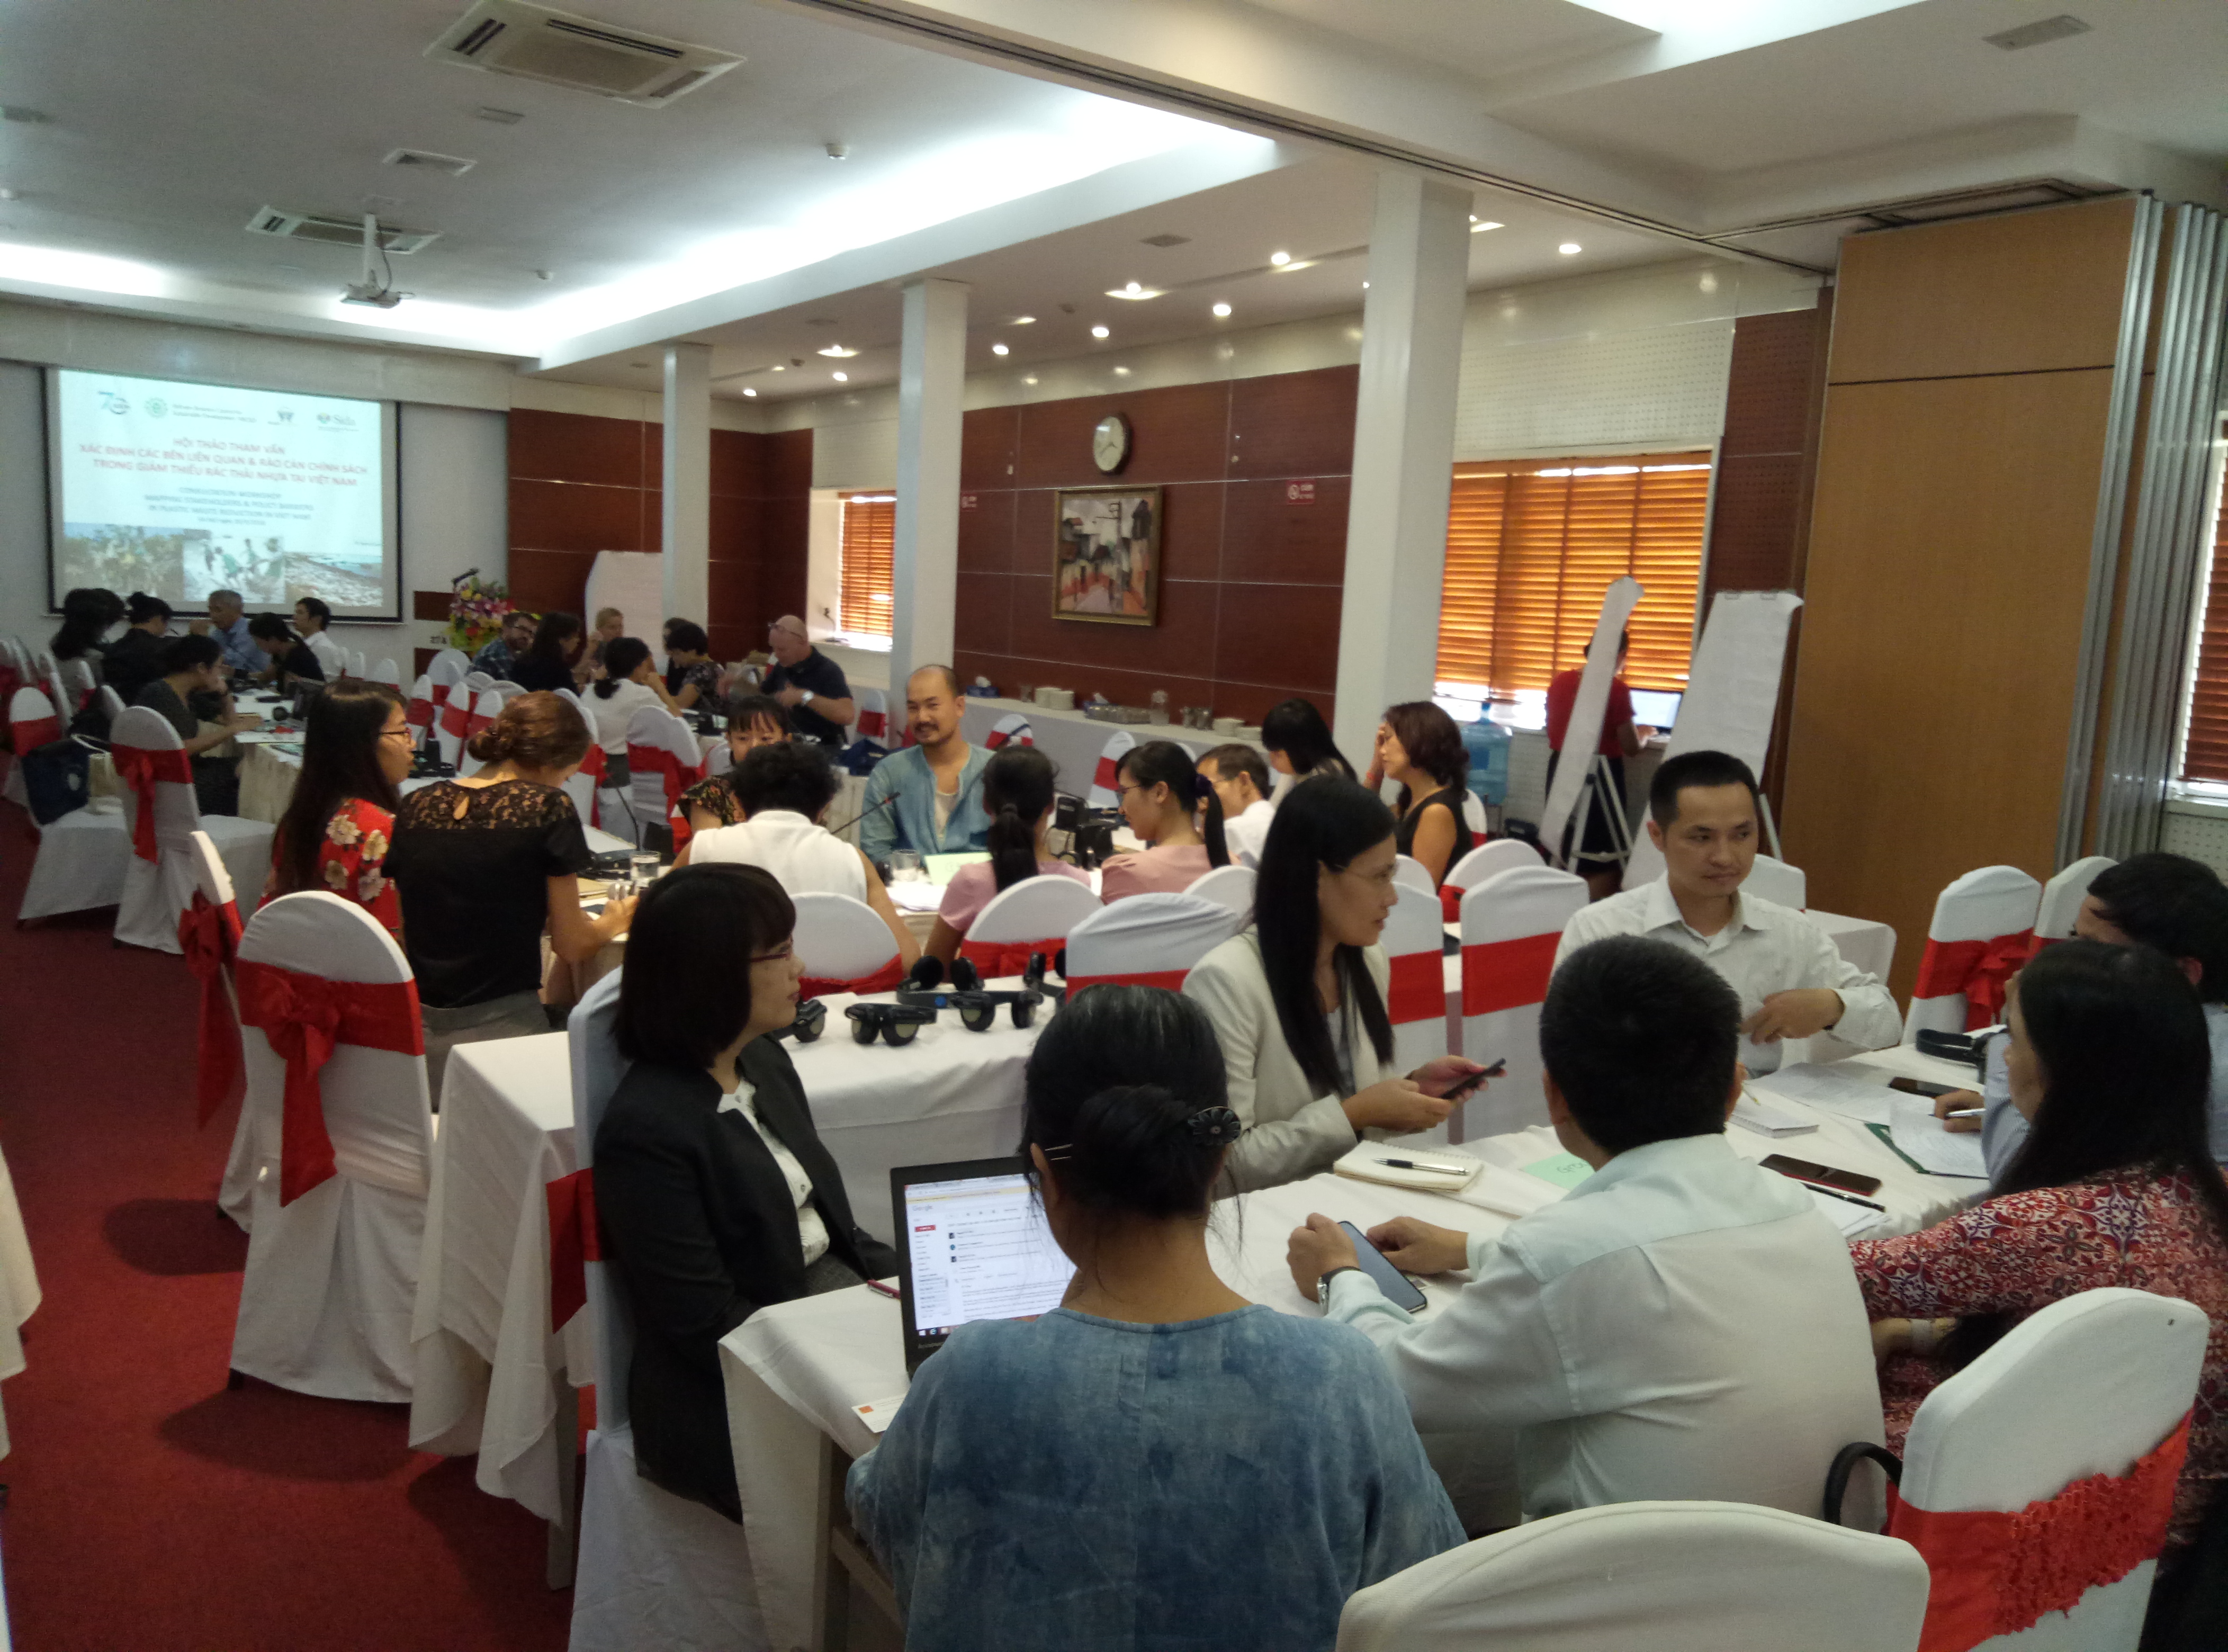 Participants at the MARPLASTICCs Theory of Change workshop in Viet Nam